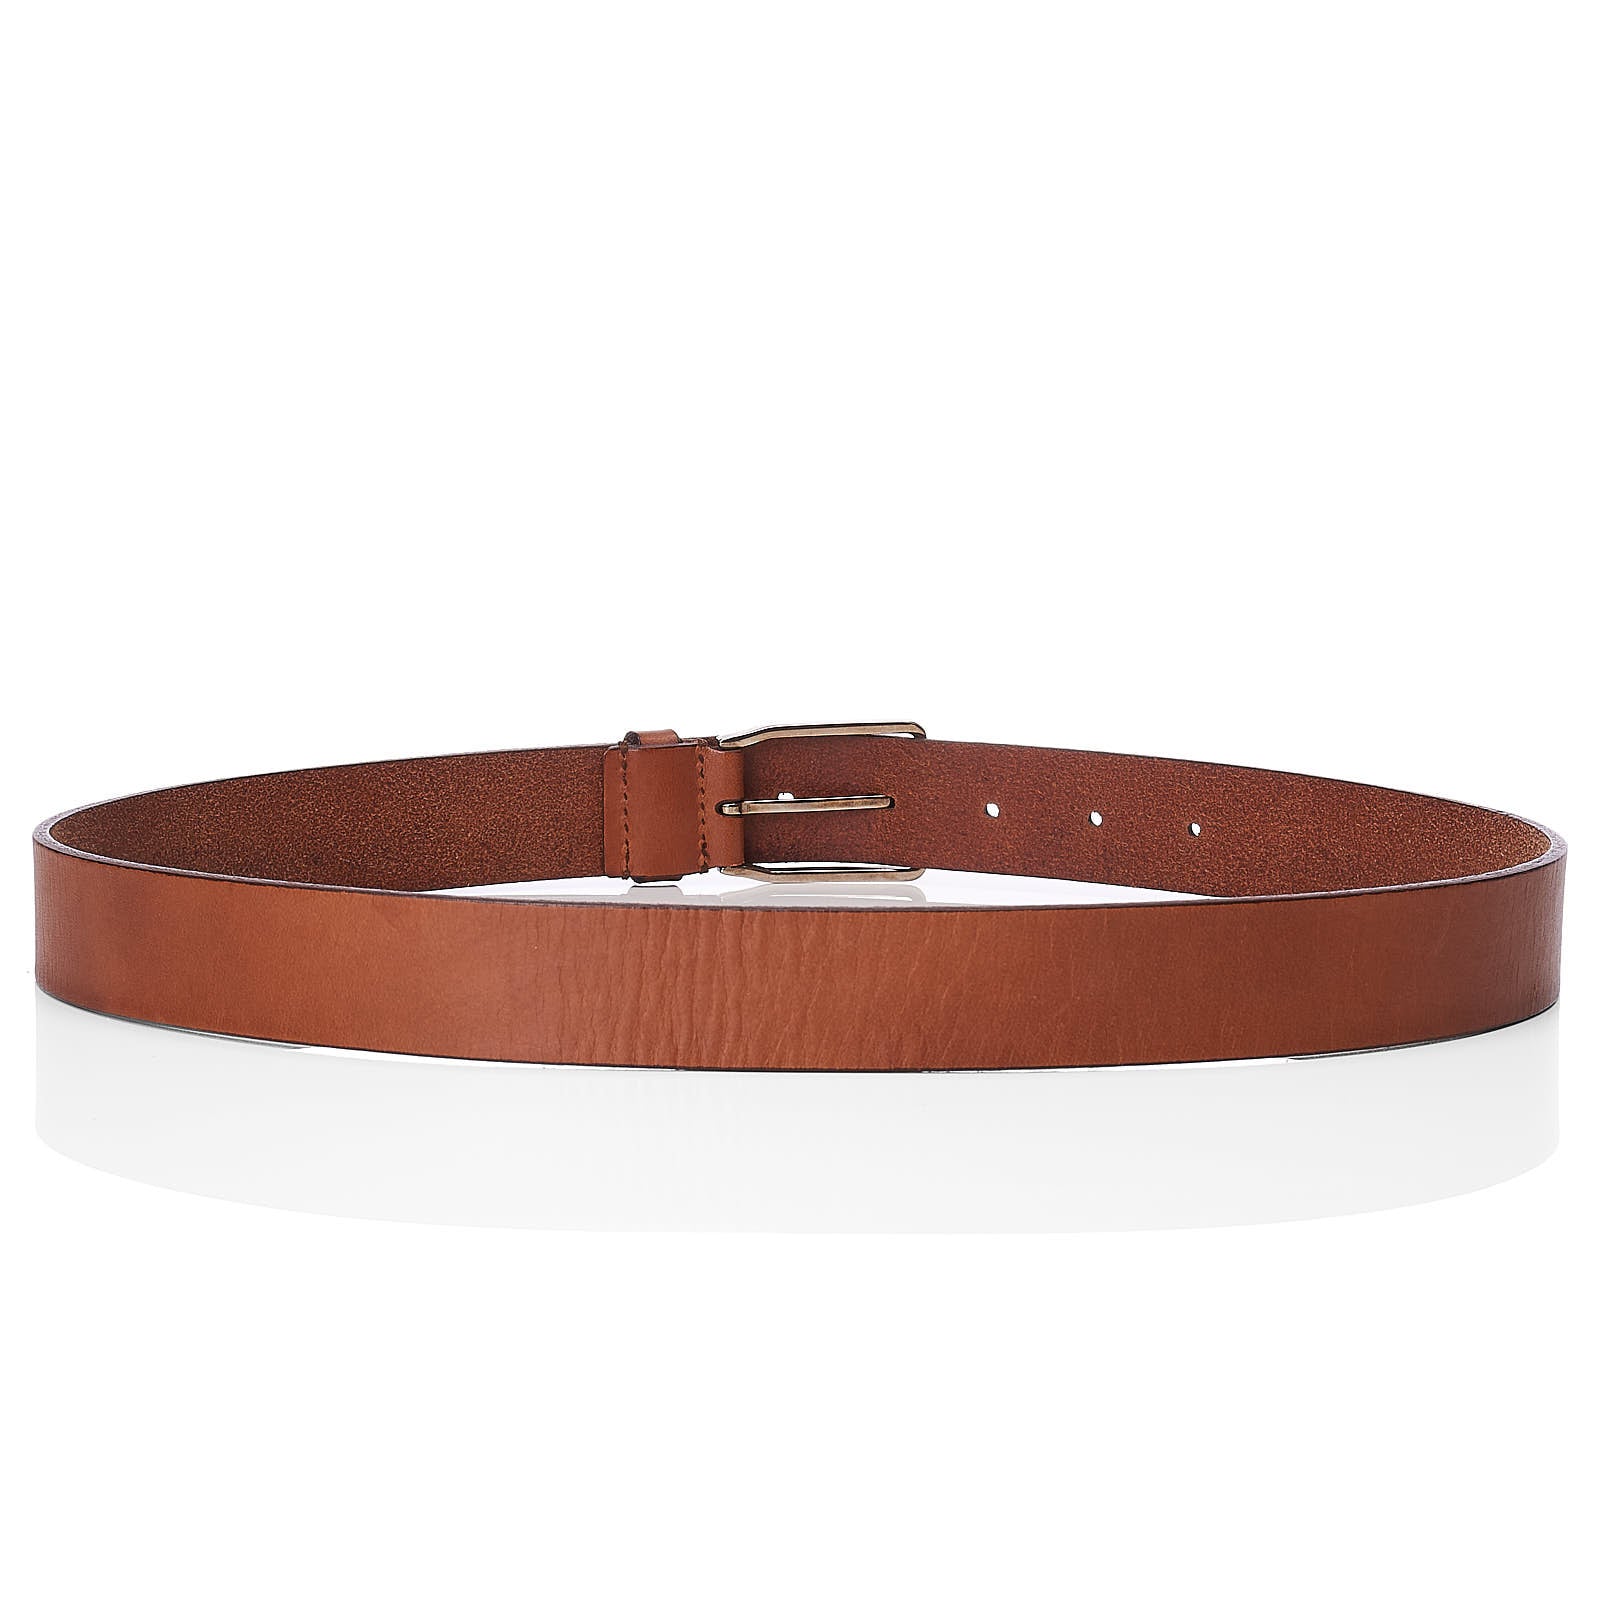 BRUNELLO CUCINELLI  Brown Leather Belt with Silver-Tone Buckle 85cm 34"